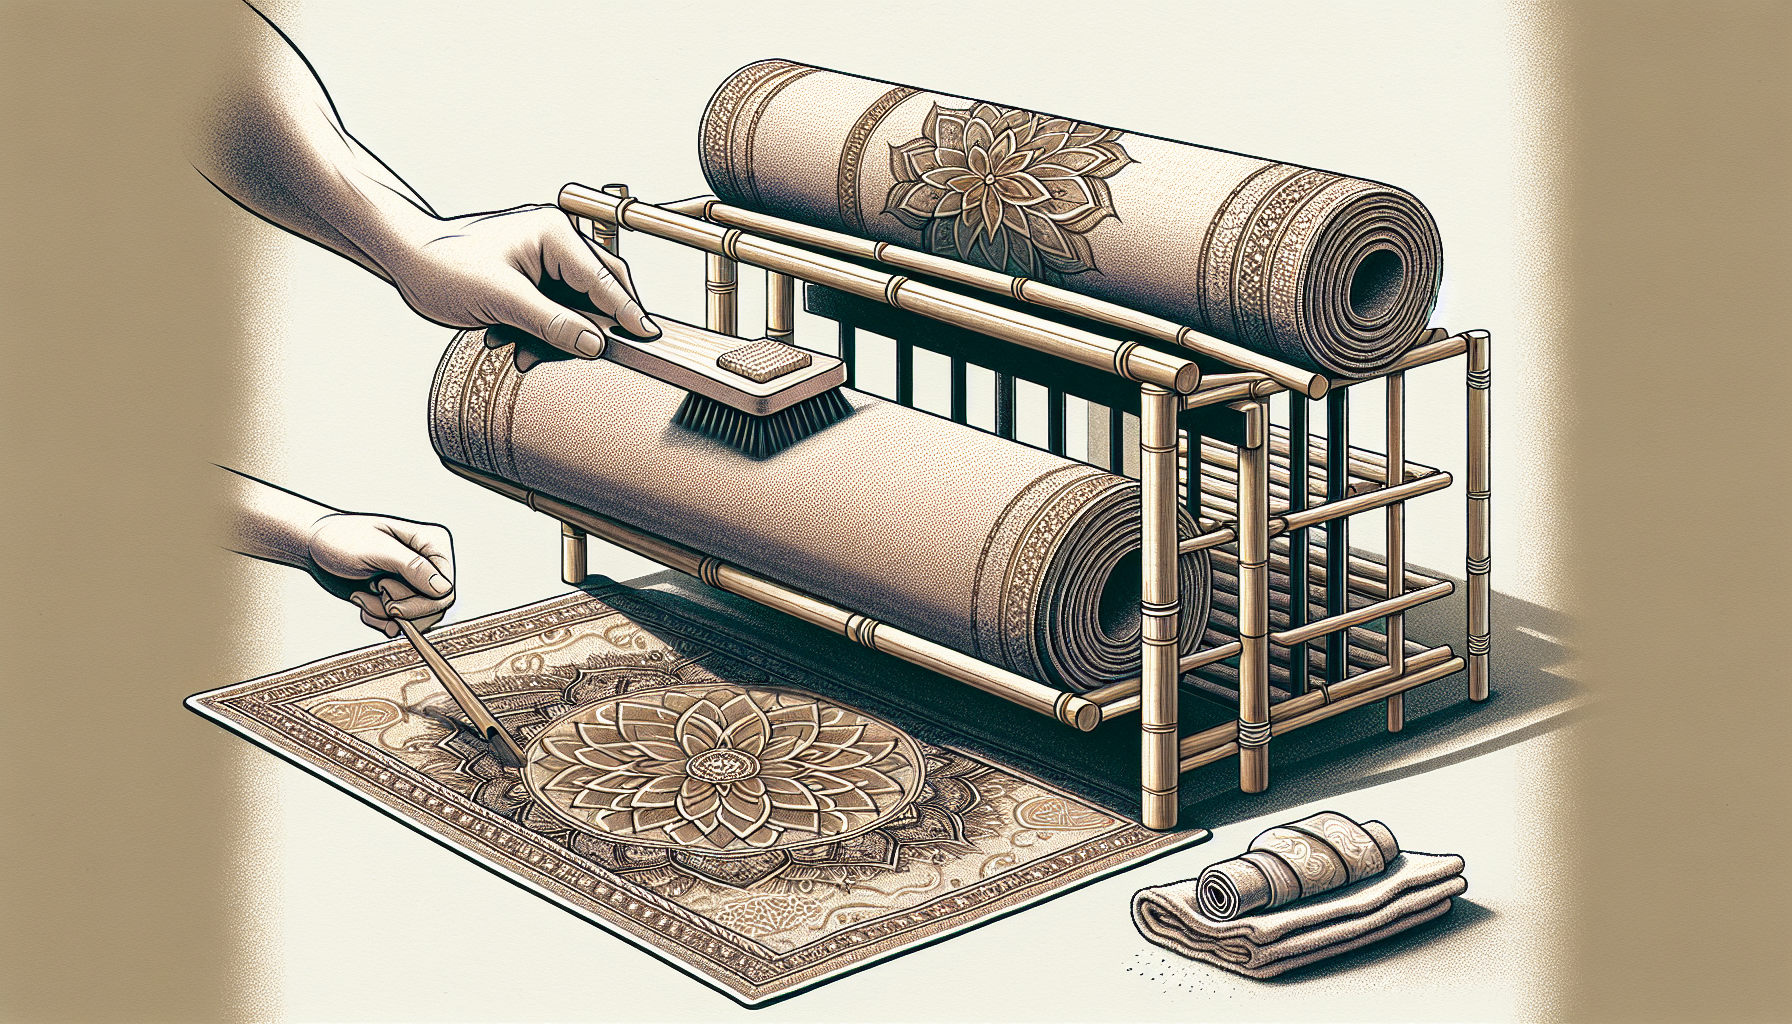 Illustration of proper care and maintenance of an expensive yoga mat